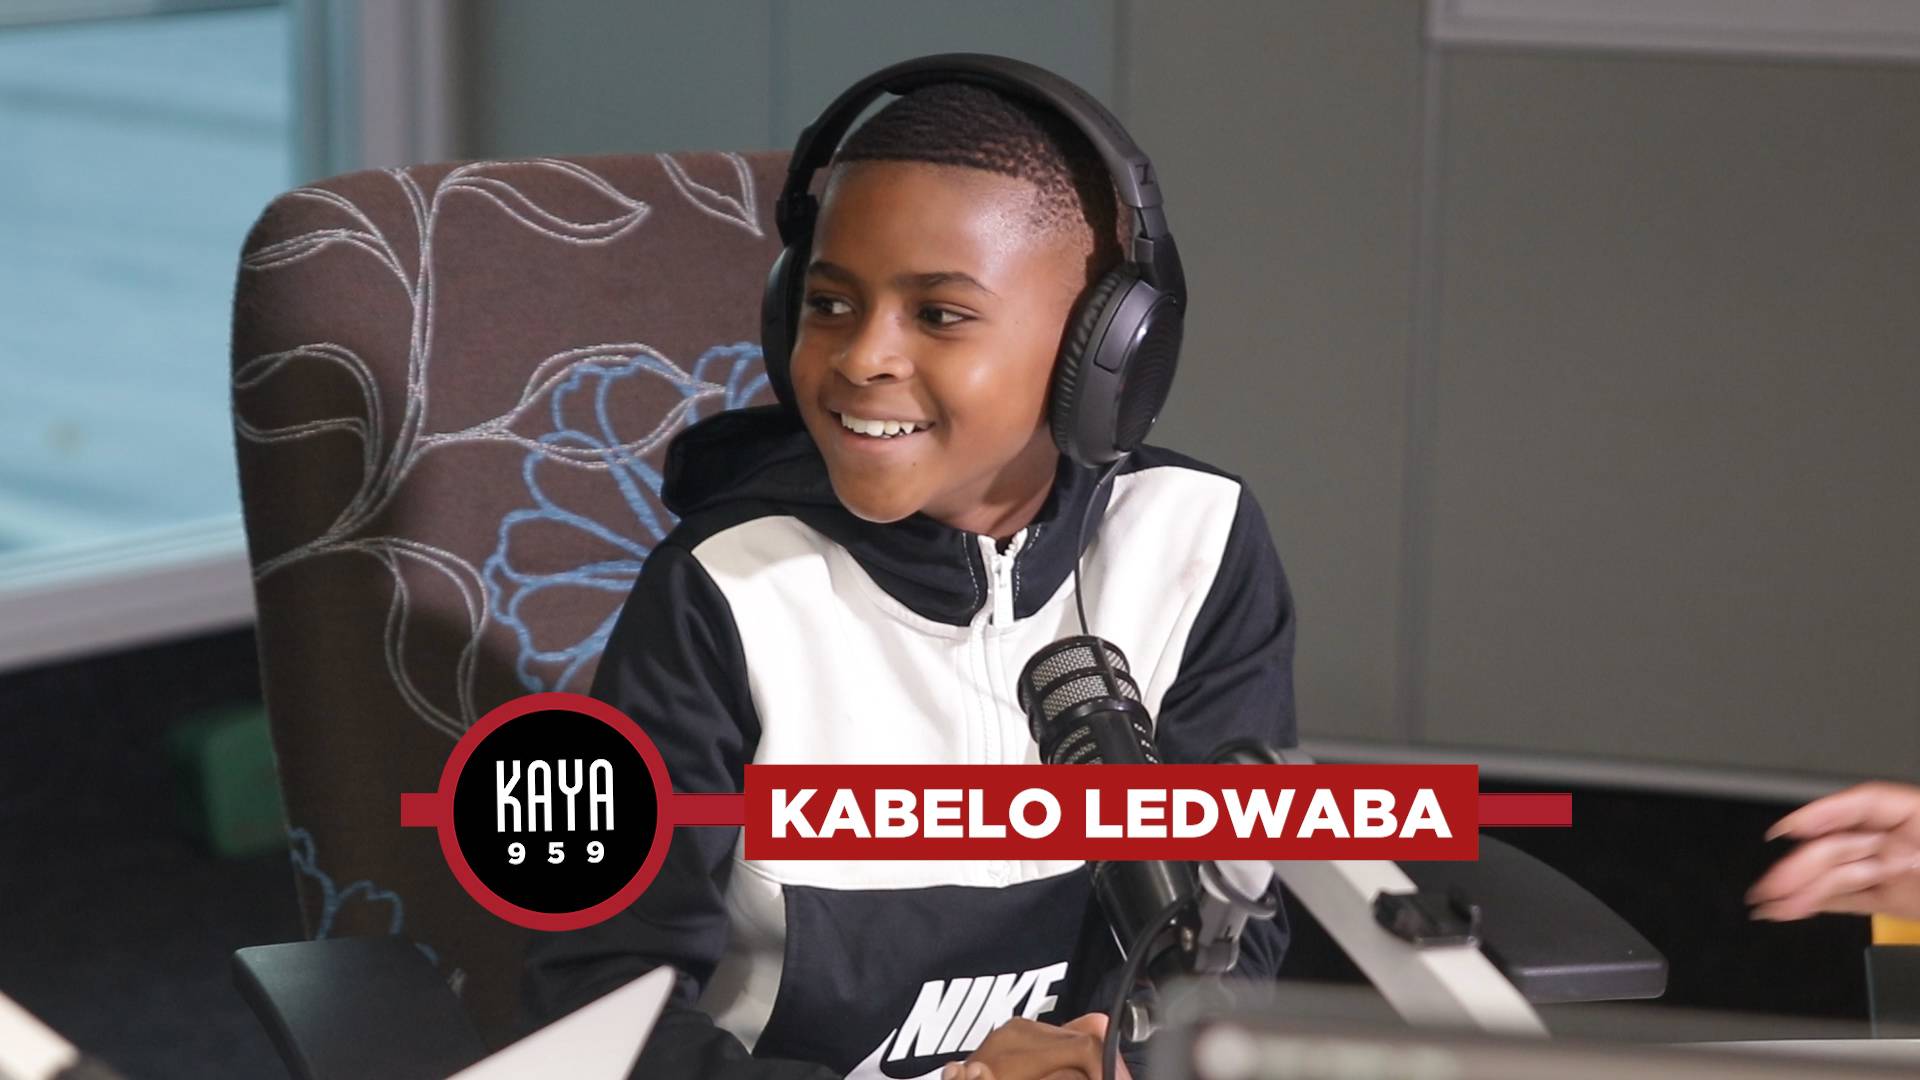 Youngest Motor Cross Rider, Kabelo Ledwaba on qualifying for a world tournament in Finland